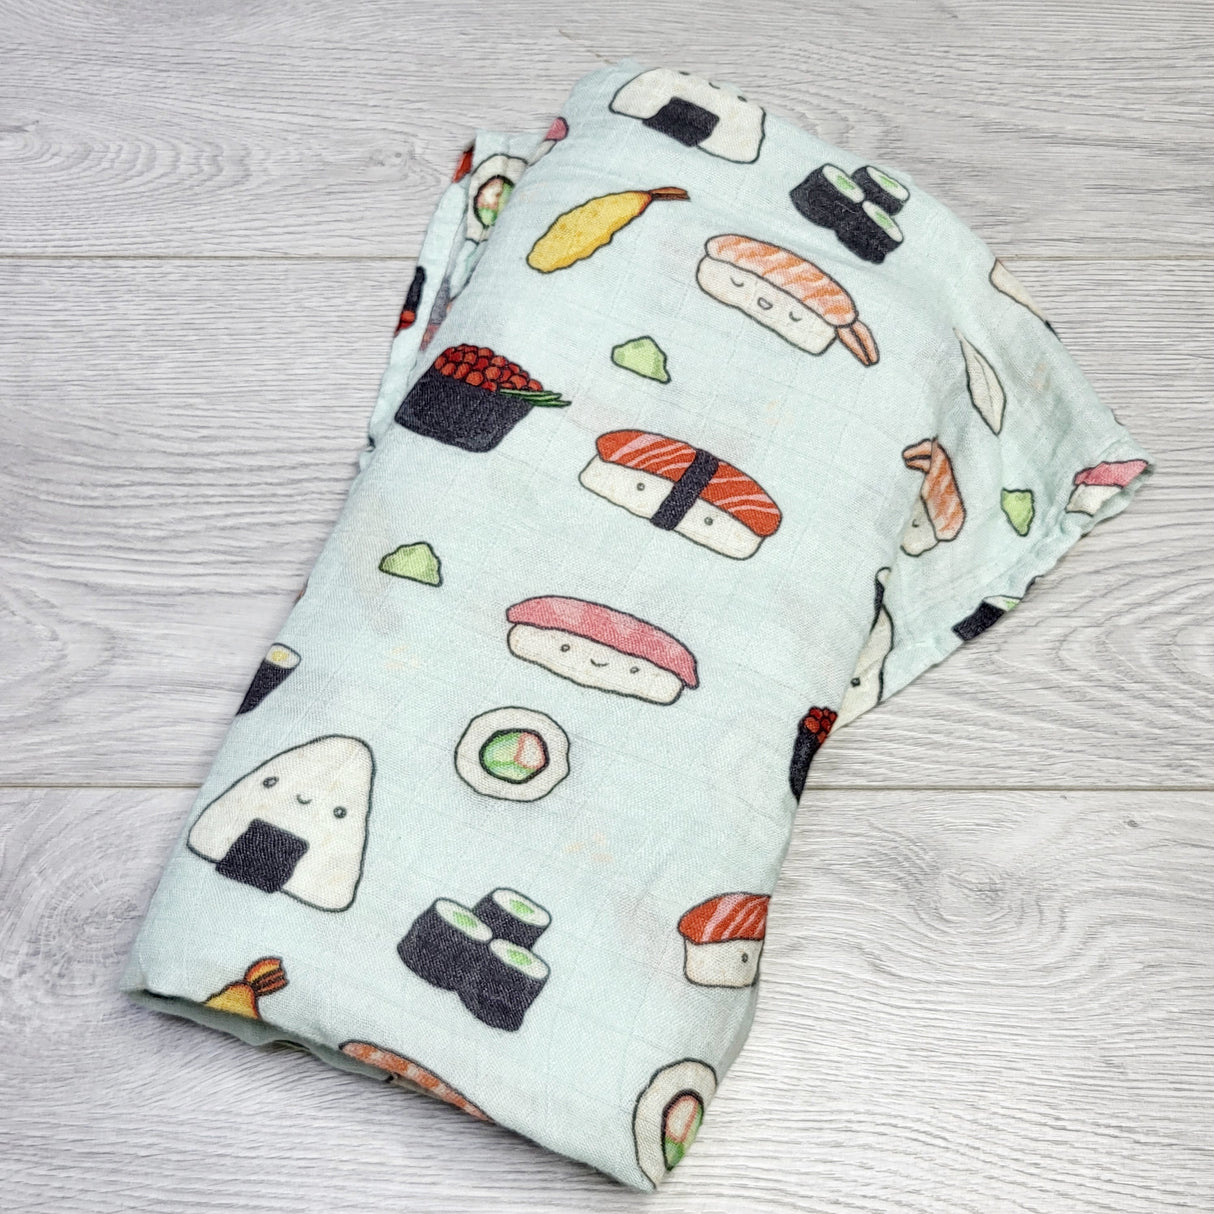 CRTH2 - Loulou Lollipop sushi patterned muslin swaddle